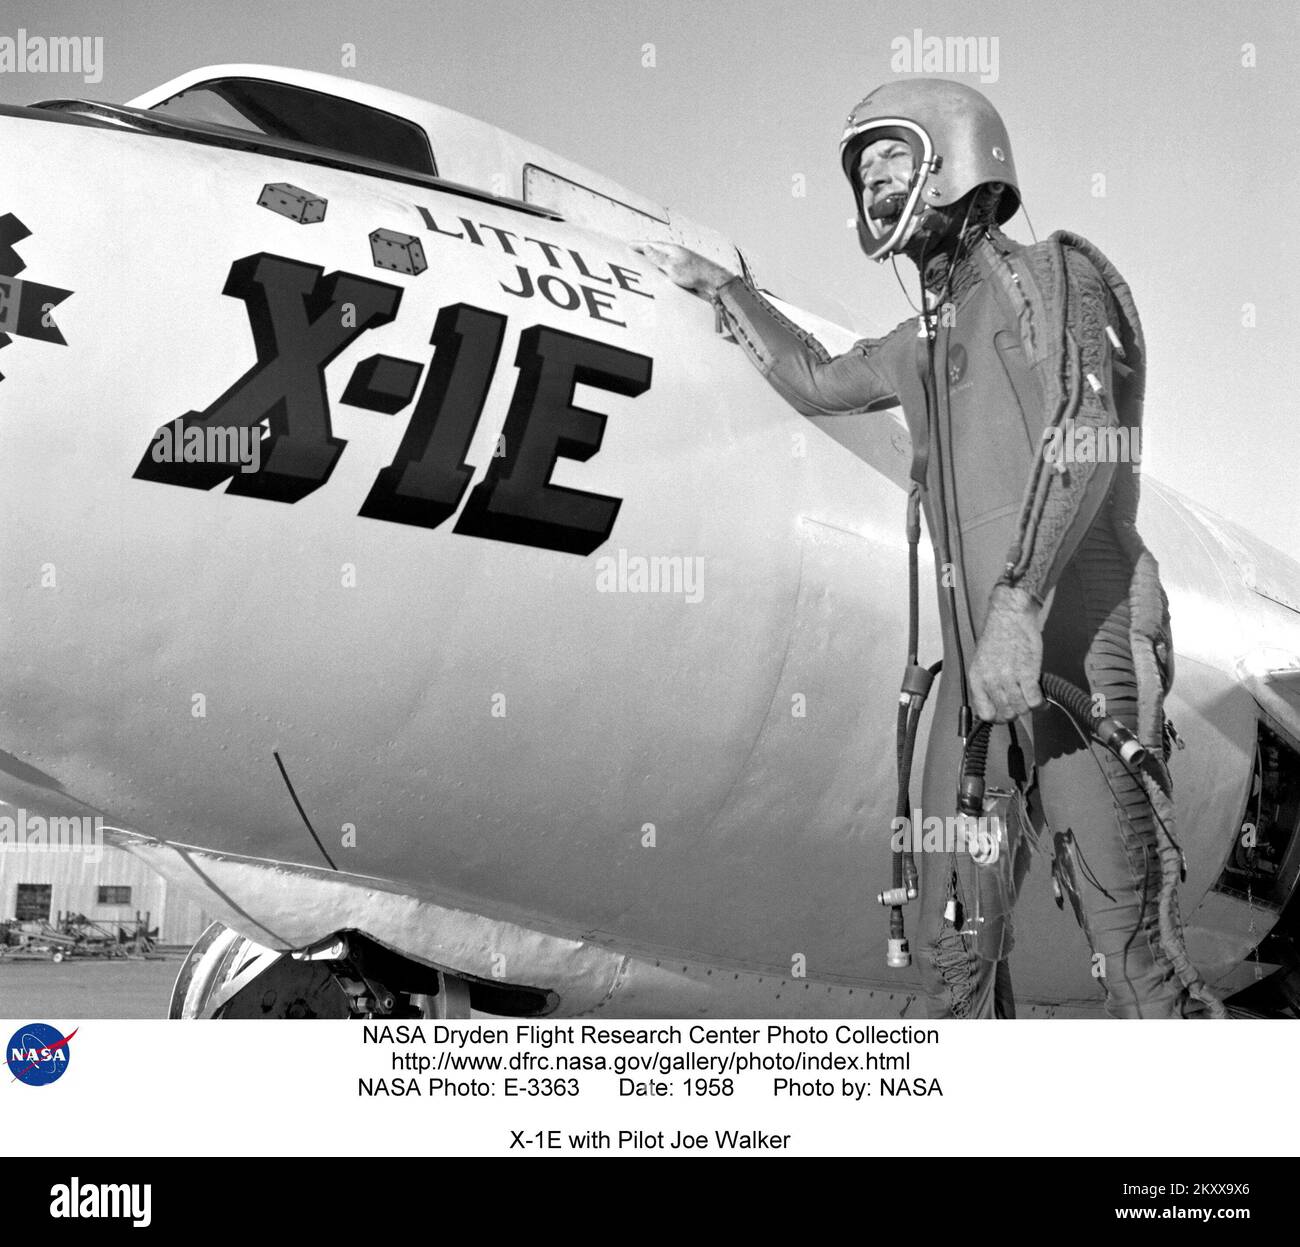 (1958) A photo of the X-1E with pilot Joe Walker suited up at the NASA High-Speed Flight Station, Edwards, California. The dice and 'Little Joe' are prominently displayed under the cockpit area. (Little Joe is a dice player's slang term for two deuces.)     Five years later when Walker reached 354,200 feet in the X-15, that aircraft carried similar artwork - 'Little Joe the II.' Walker is shown in the photo above wearing an early partial pressure suit. This protected the pilot if cockpit pressure was lost above 50,000 feet. Stock Photo